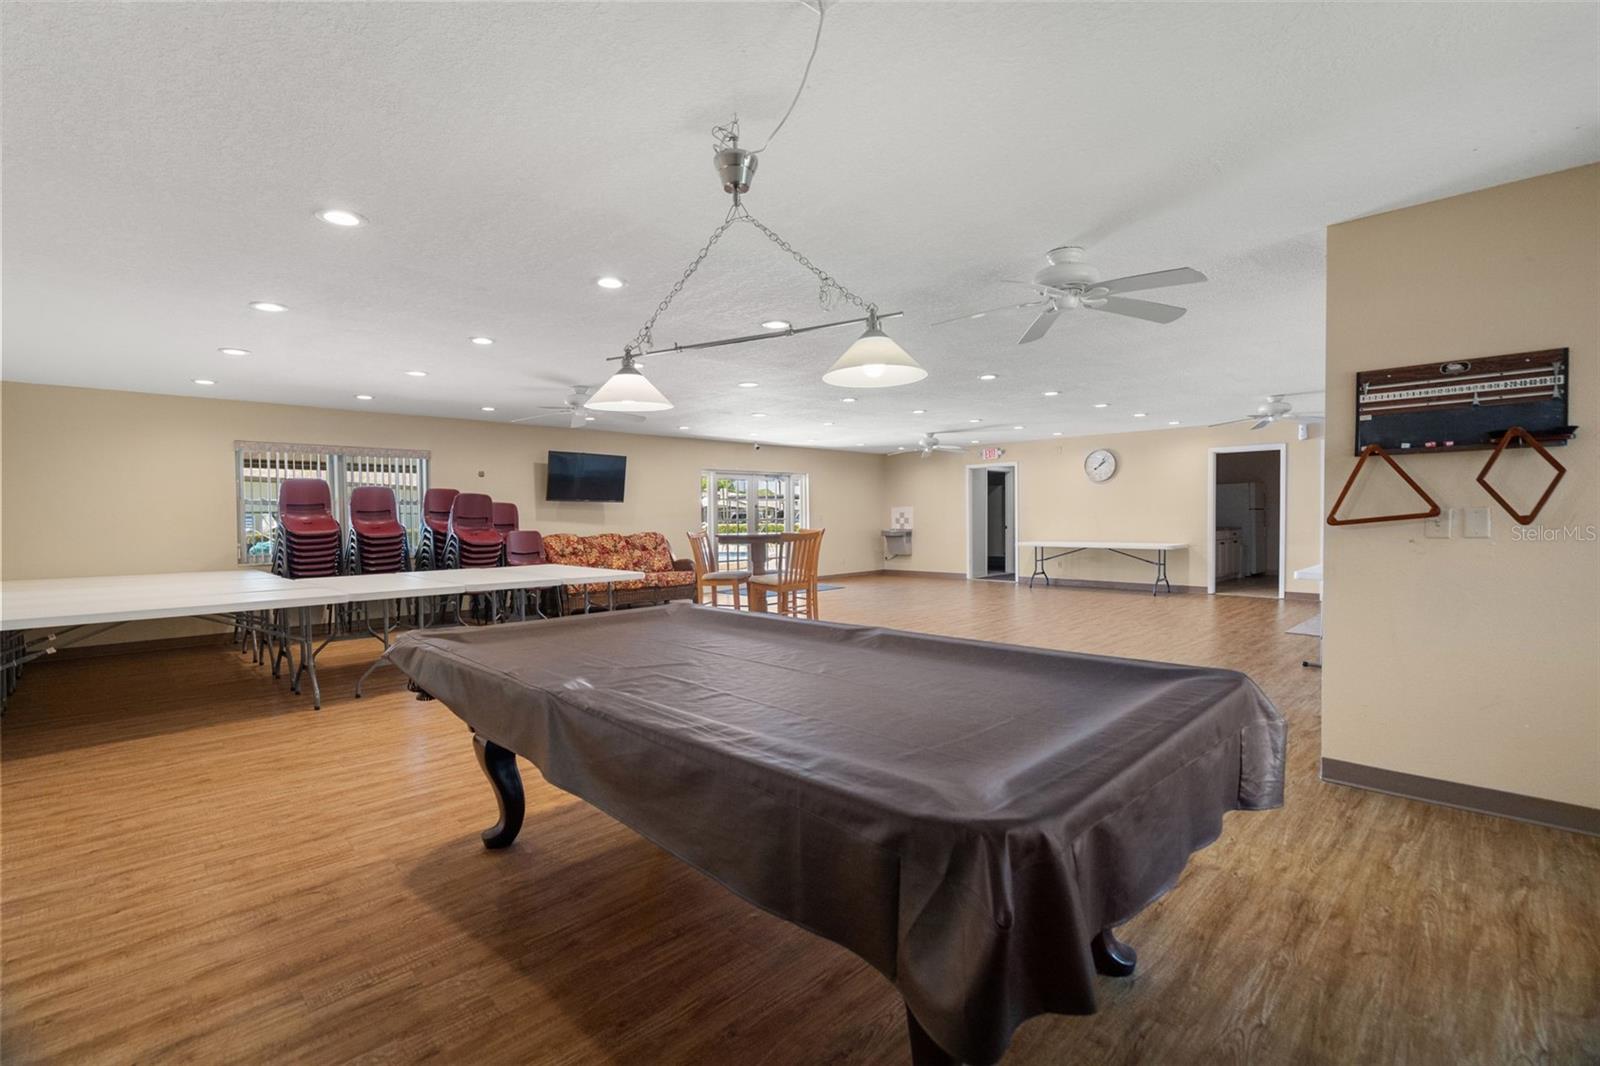 Inside the clubhouse, you'll discover ample tables and chairs, perfect for meetings or parties, along with a full-size pool table for your entertainment.